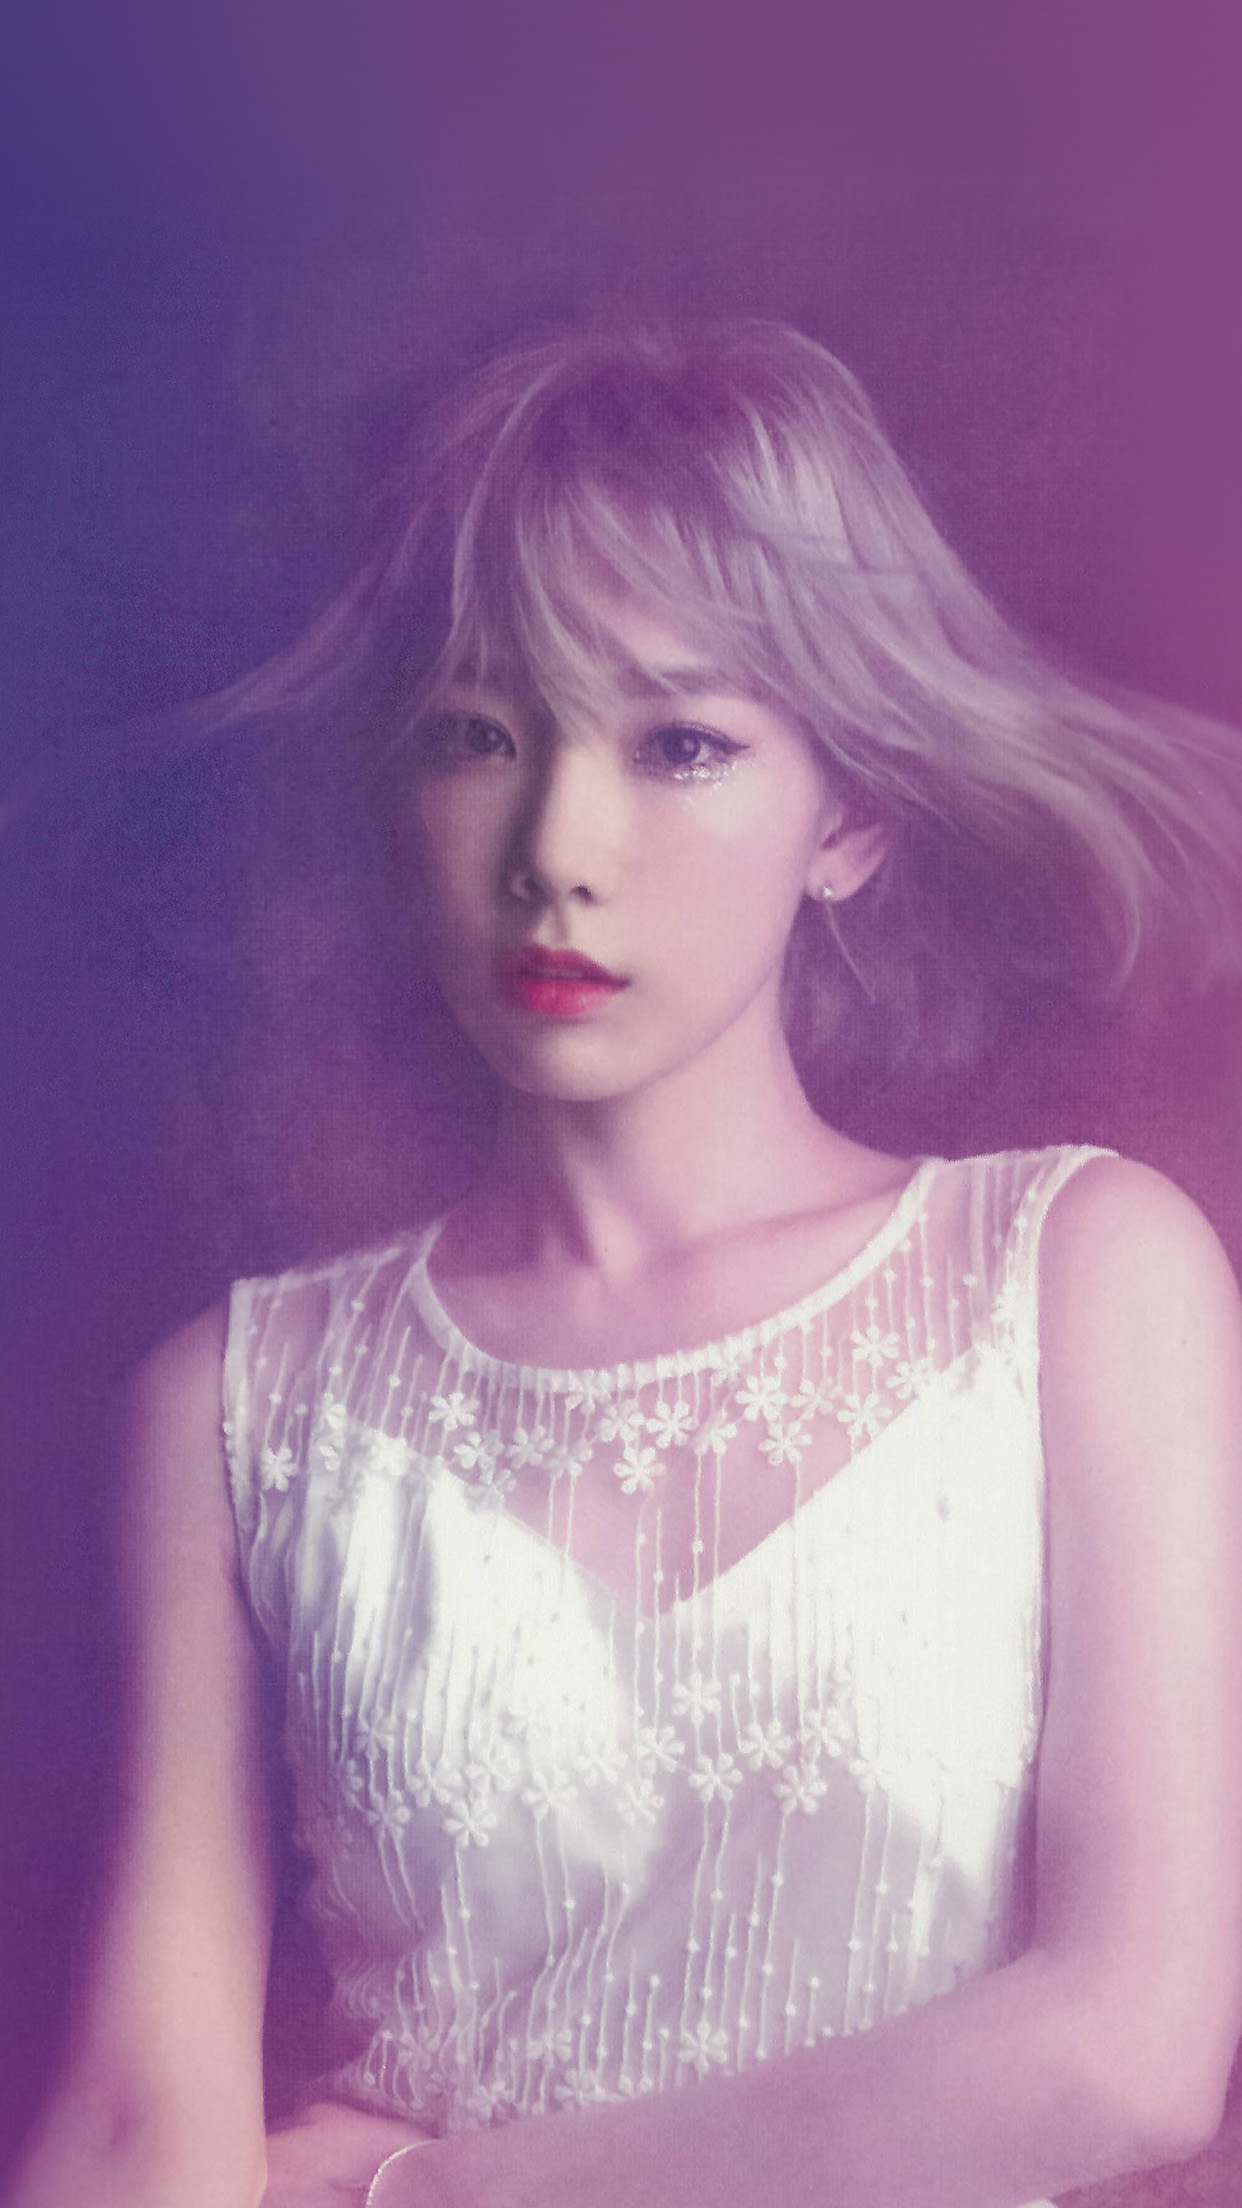 Iphone 7 Plus - Butterfly Kiss Taeyeon Photoshoot , HD Wallpaper & Backgrounds